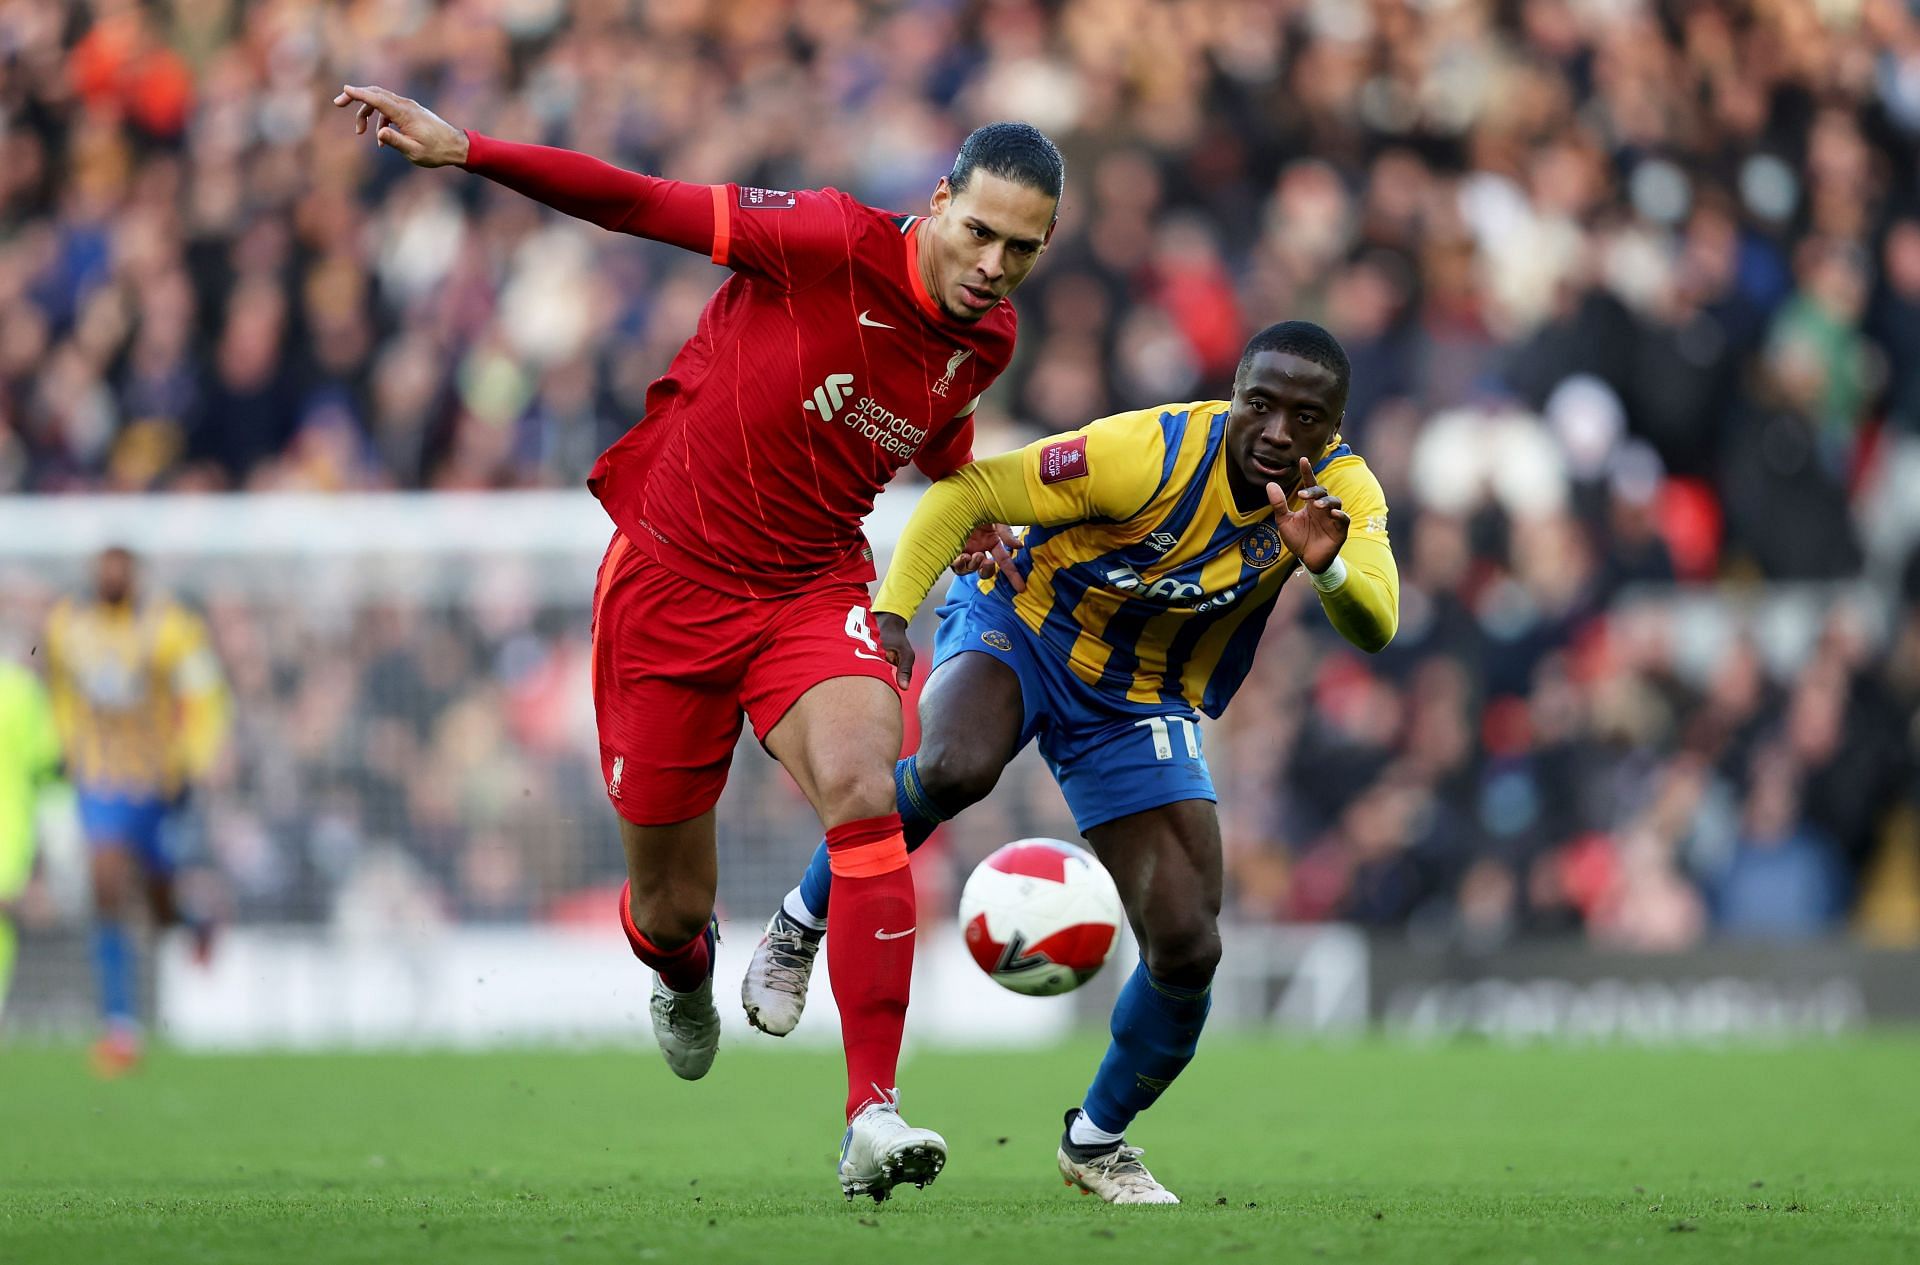 Liverpool v Shrewsbury Town: The Emirates FA Cup Third Round